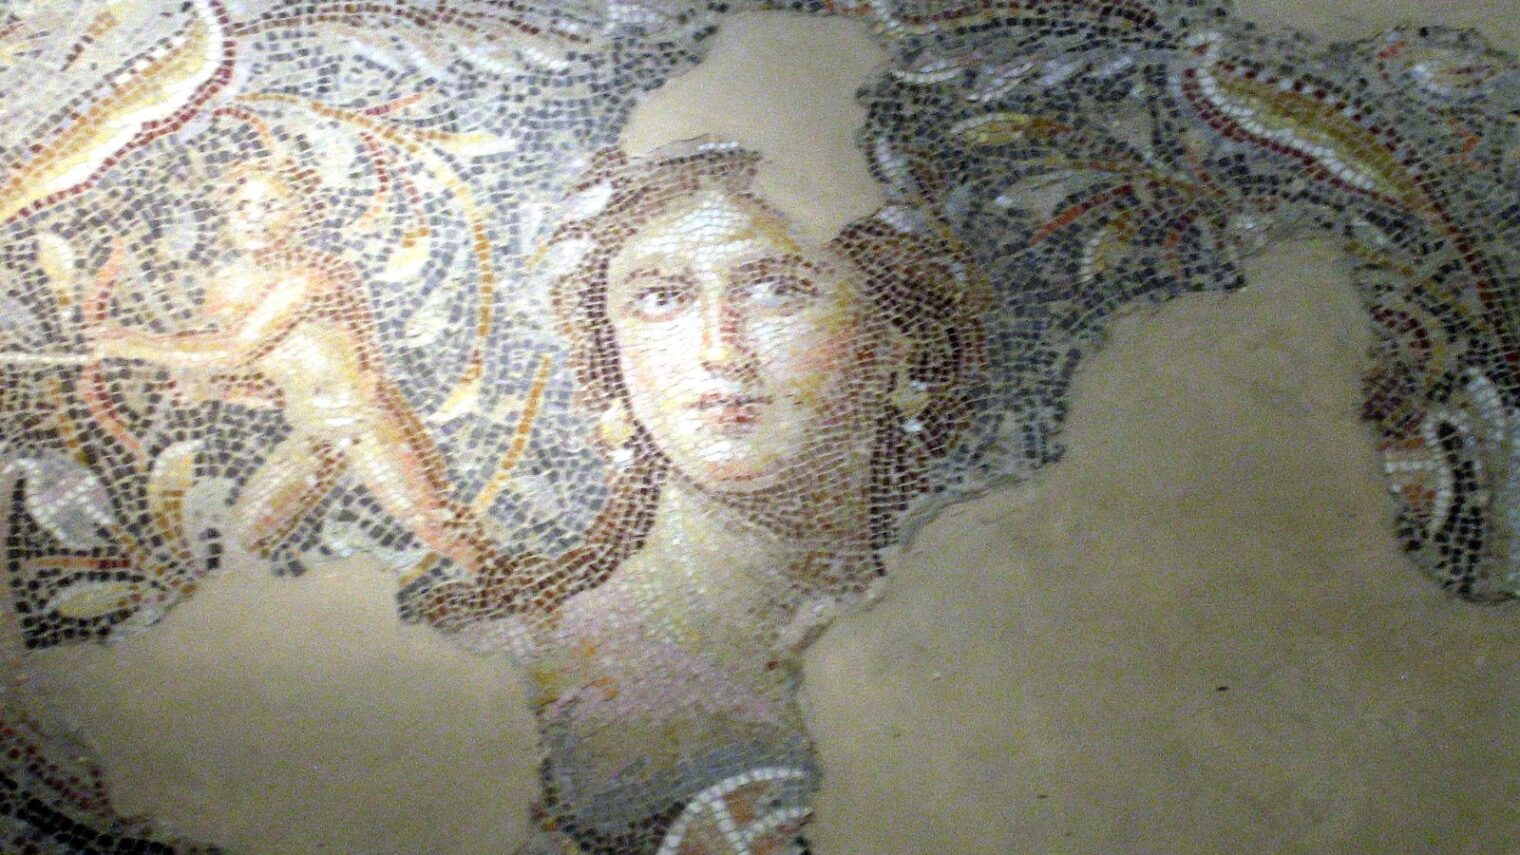 Dionysus House, another ancient villa found in Tzipori from the third century Roman period, contains the “Mona Lisa of the Galilee” -- a woman peeping up from the floor alongside images of Greek wine god Dionysus. Photo by Tomisti/Wikimedia Commons